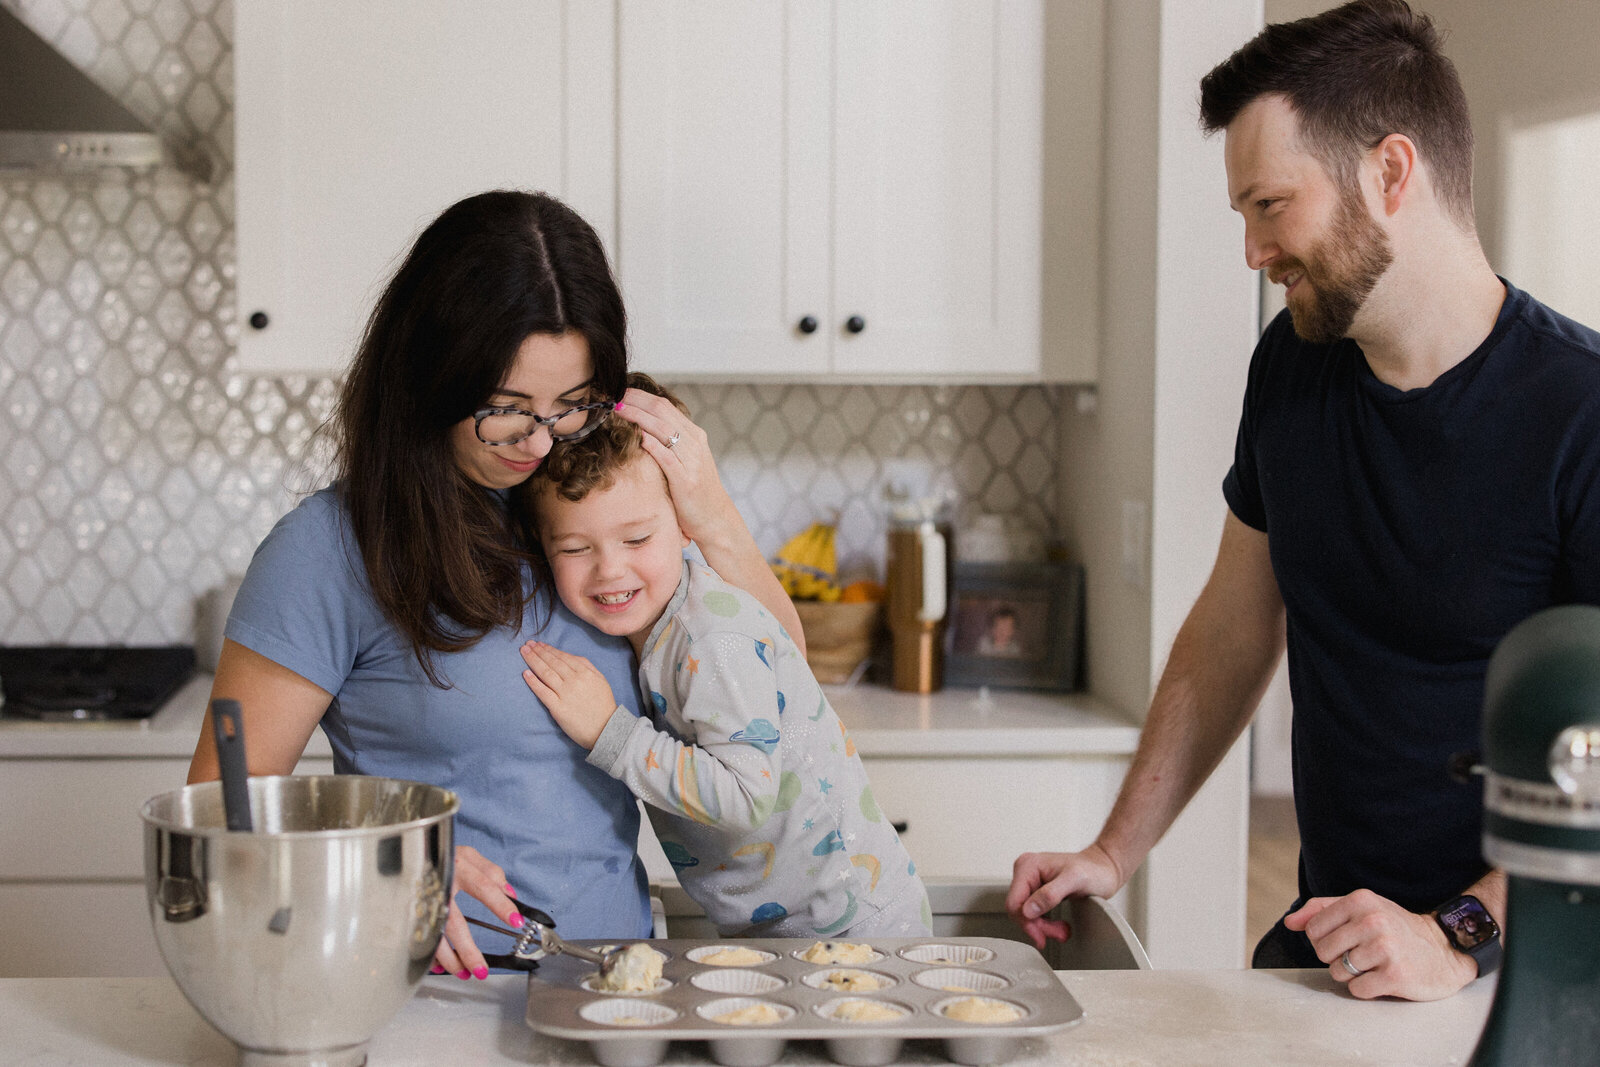 Mom hugs son and dad looks on while baking during Saturday morning family session